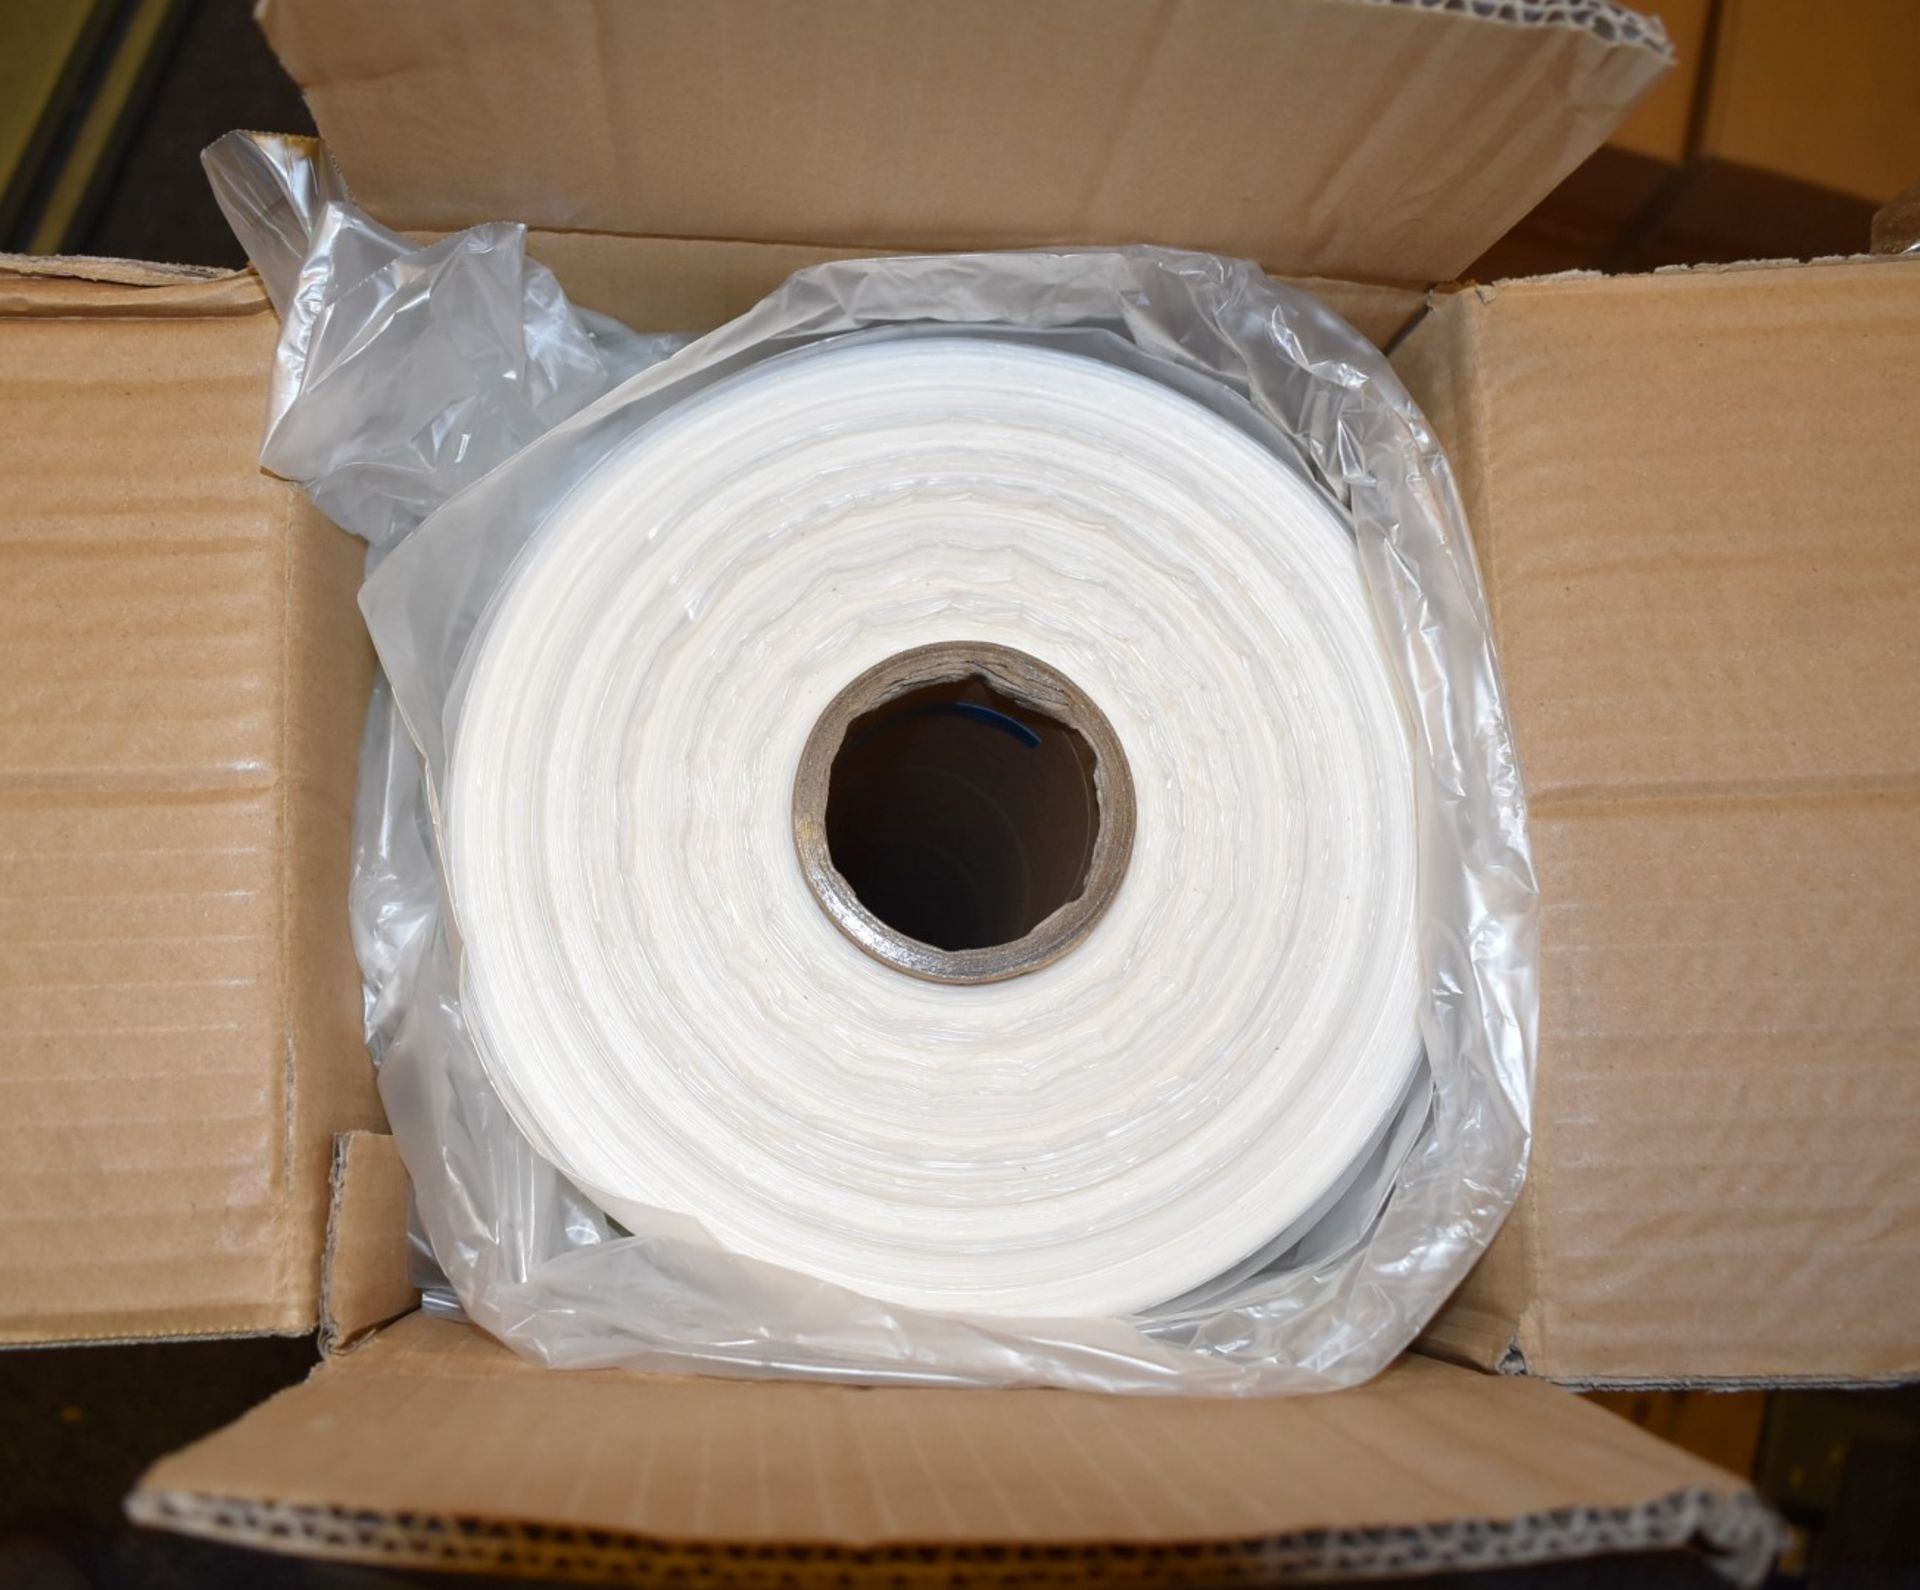 2 x Rolls of Kite Mini Air Wrapper Cushion Packaging - 400 Meter Rolls of 800mm Uninflated Air - Image 3 of 3